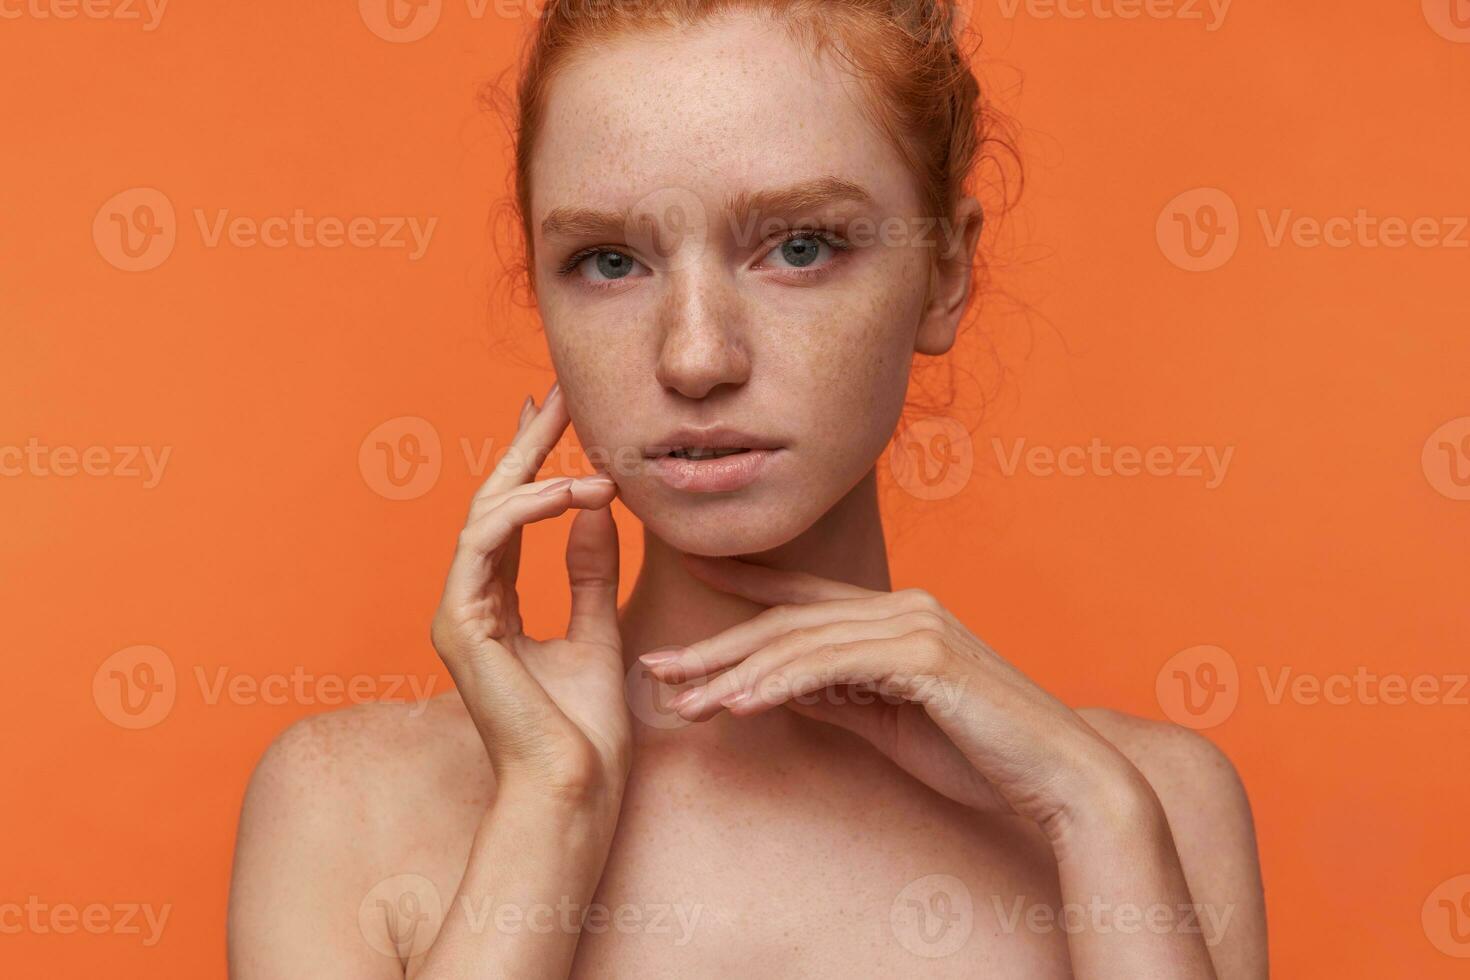 Studio photo of graceful young readhead lady with foxy hair wearing no make-up, raising hand to her face in fine way, touching cheek softly while posing over orange background